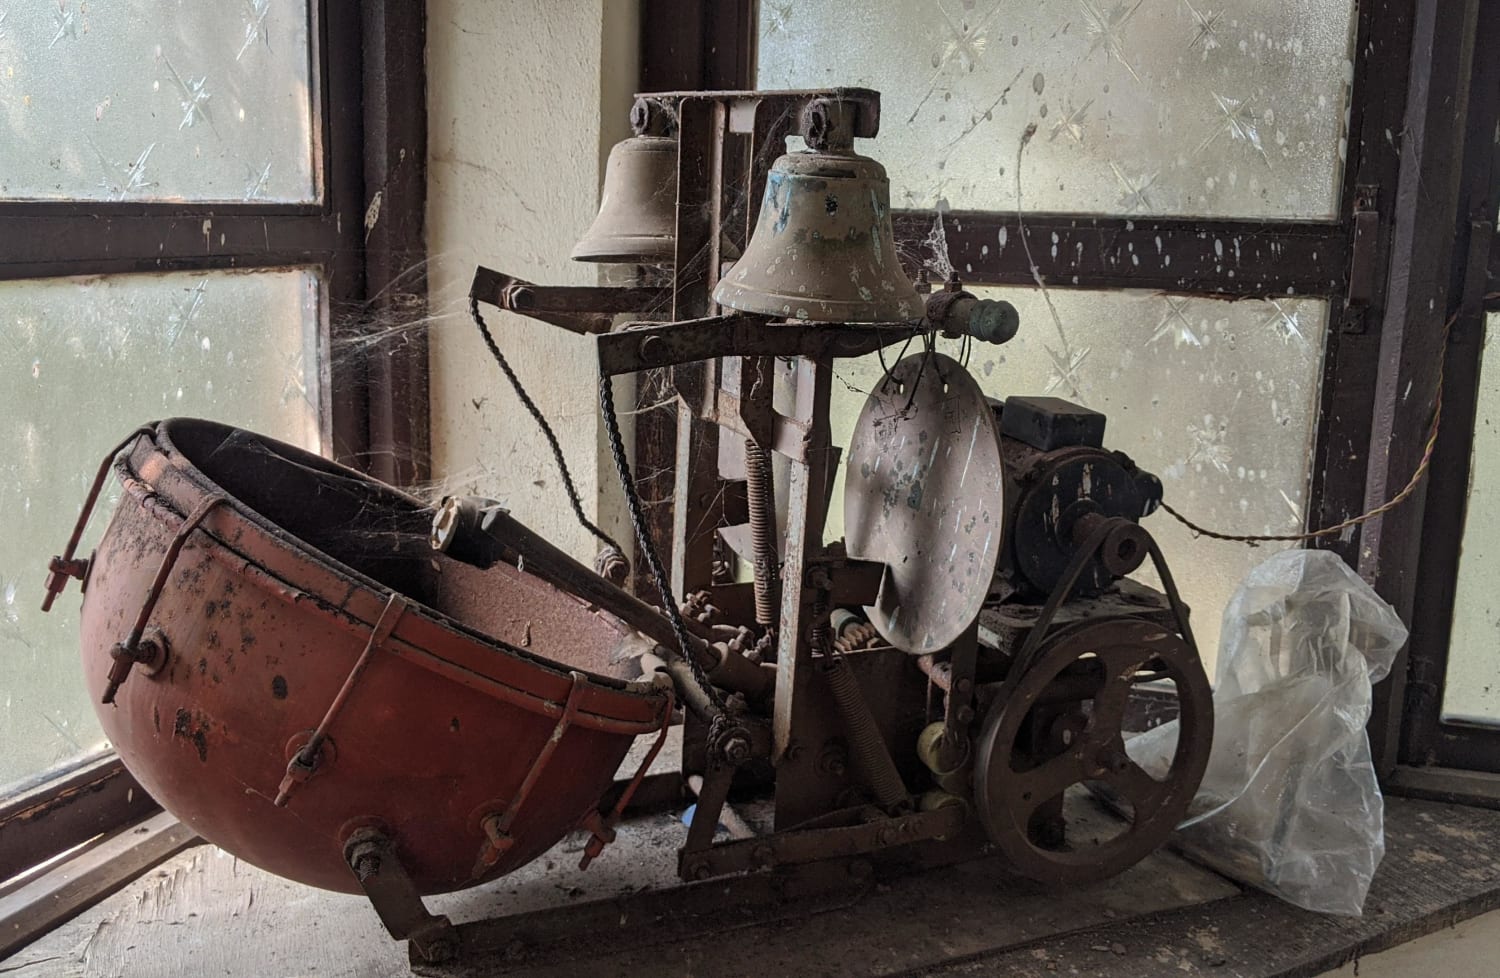 Abandoned electrically powered mechanical instrument, for playing music in a Hindu temple in Maharashtra, India